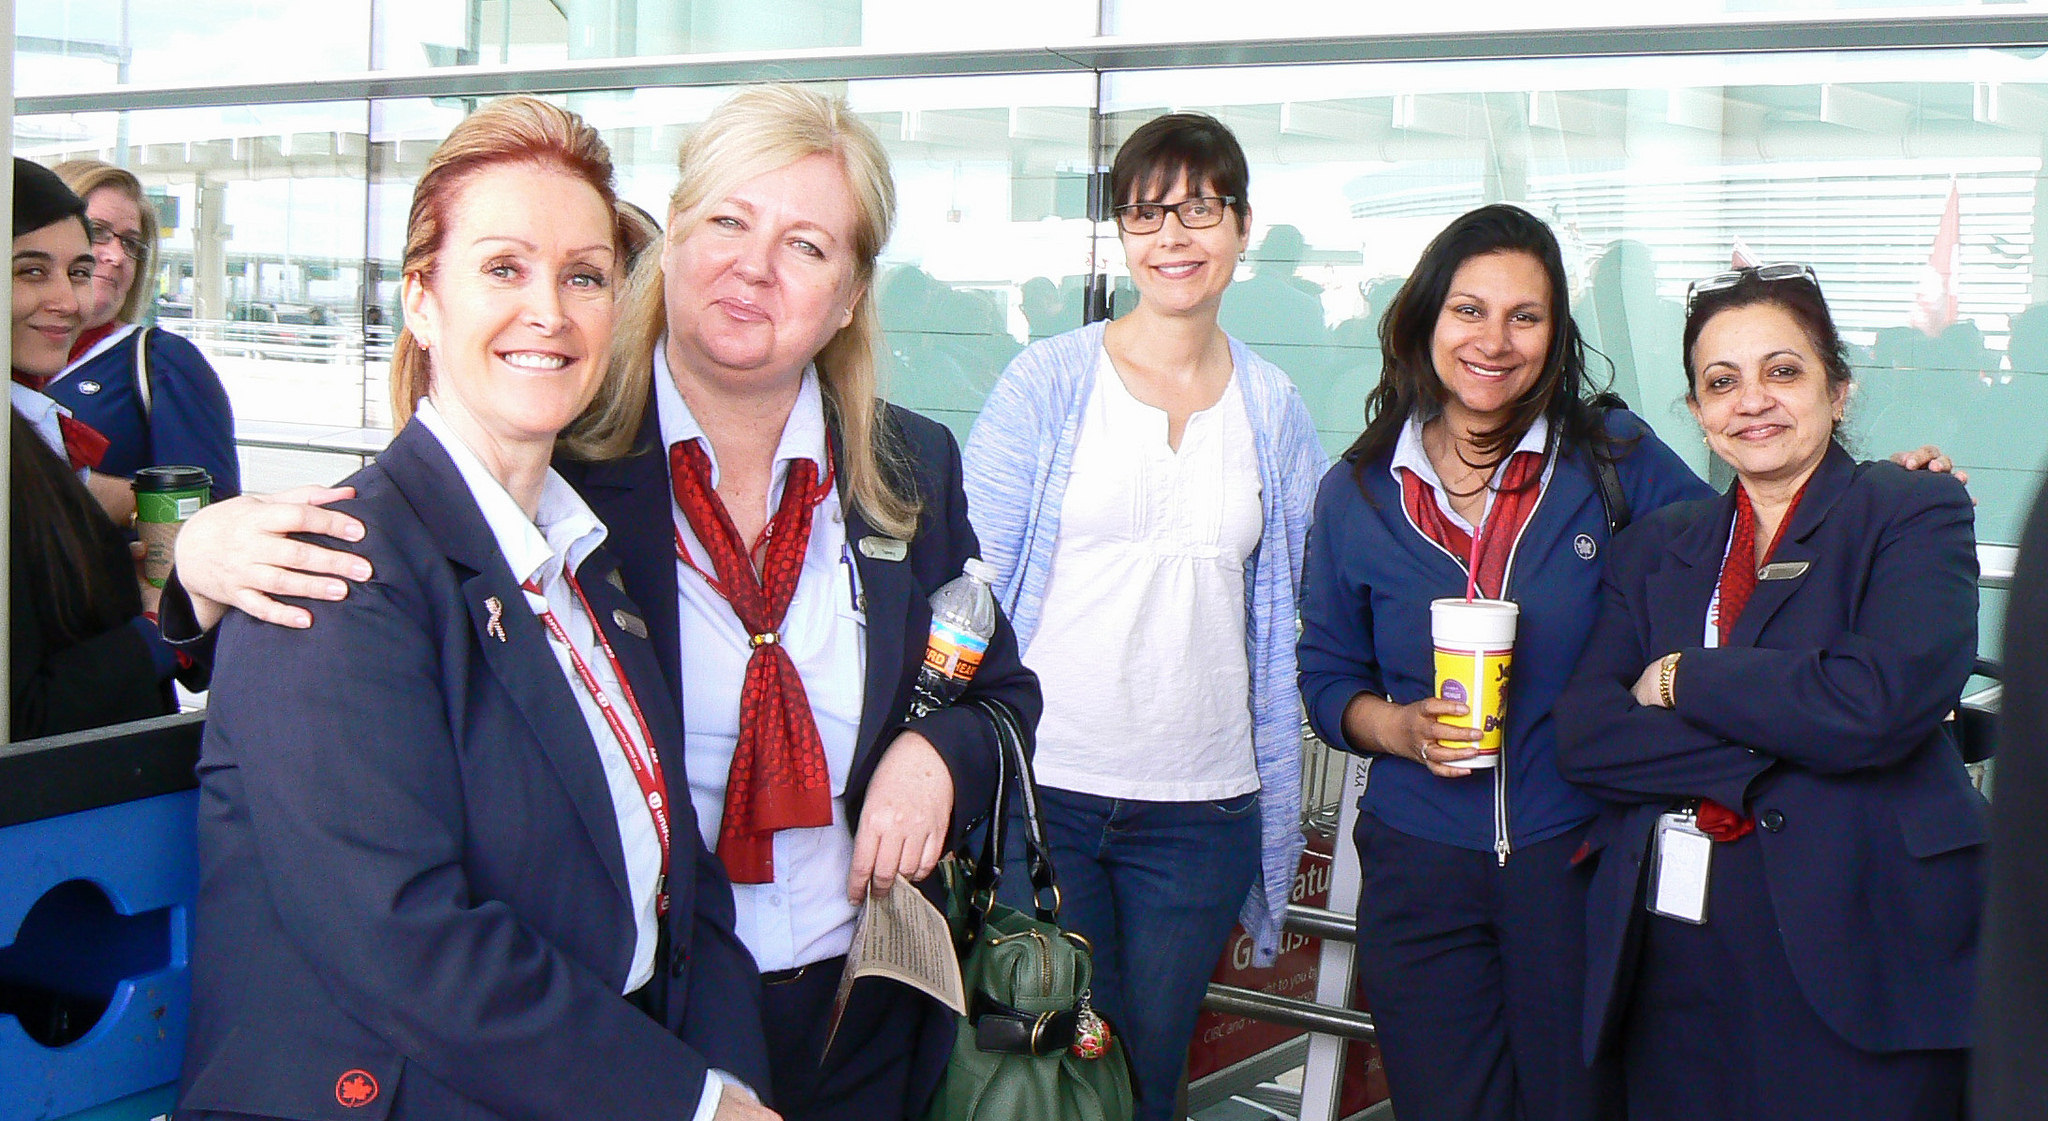 Group shot of women Air Canada workers in uniform.